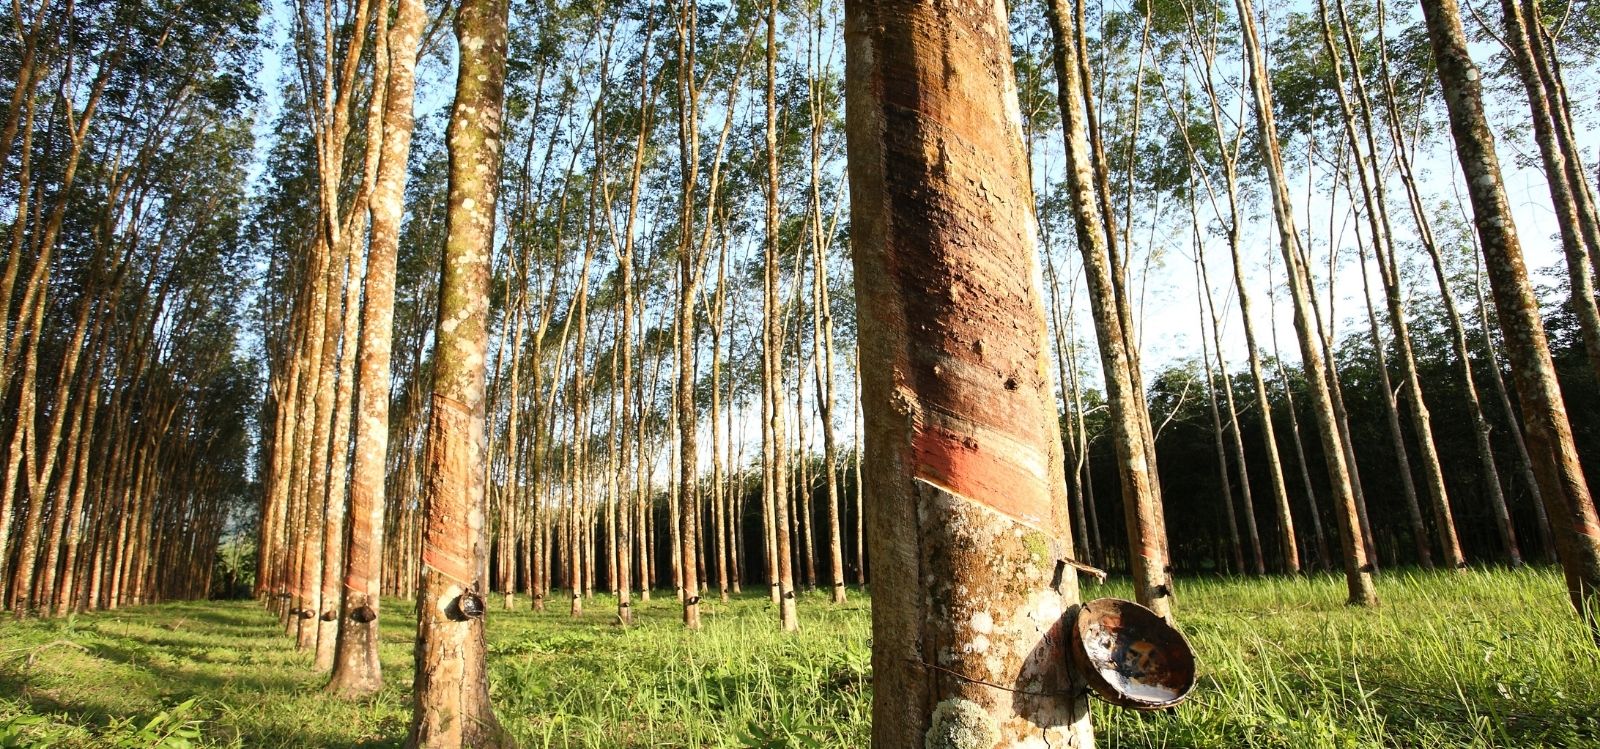 Latex Production Rubber tree